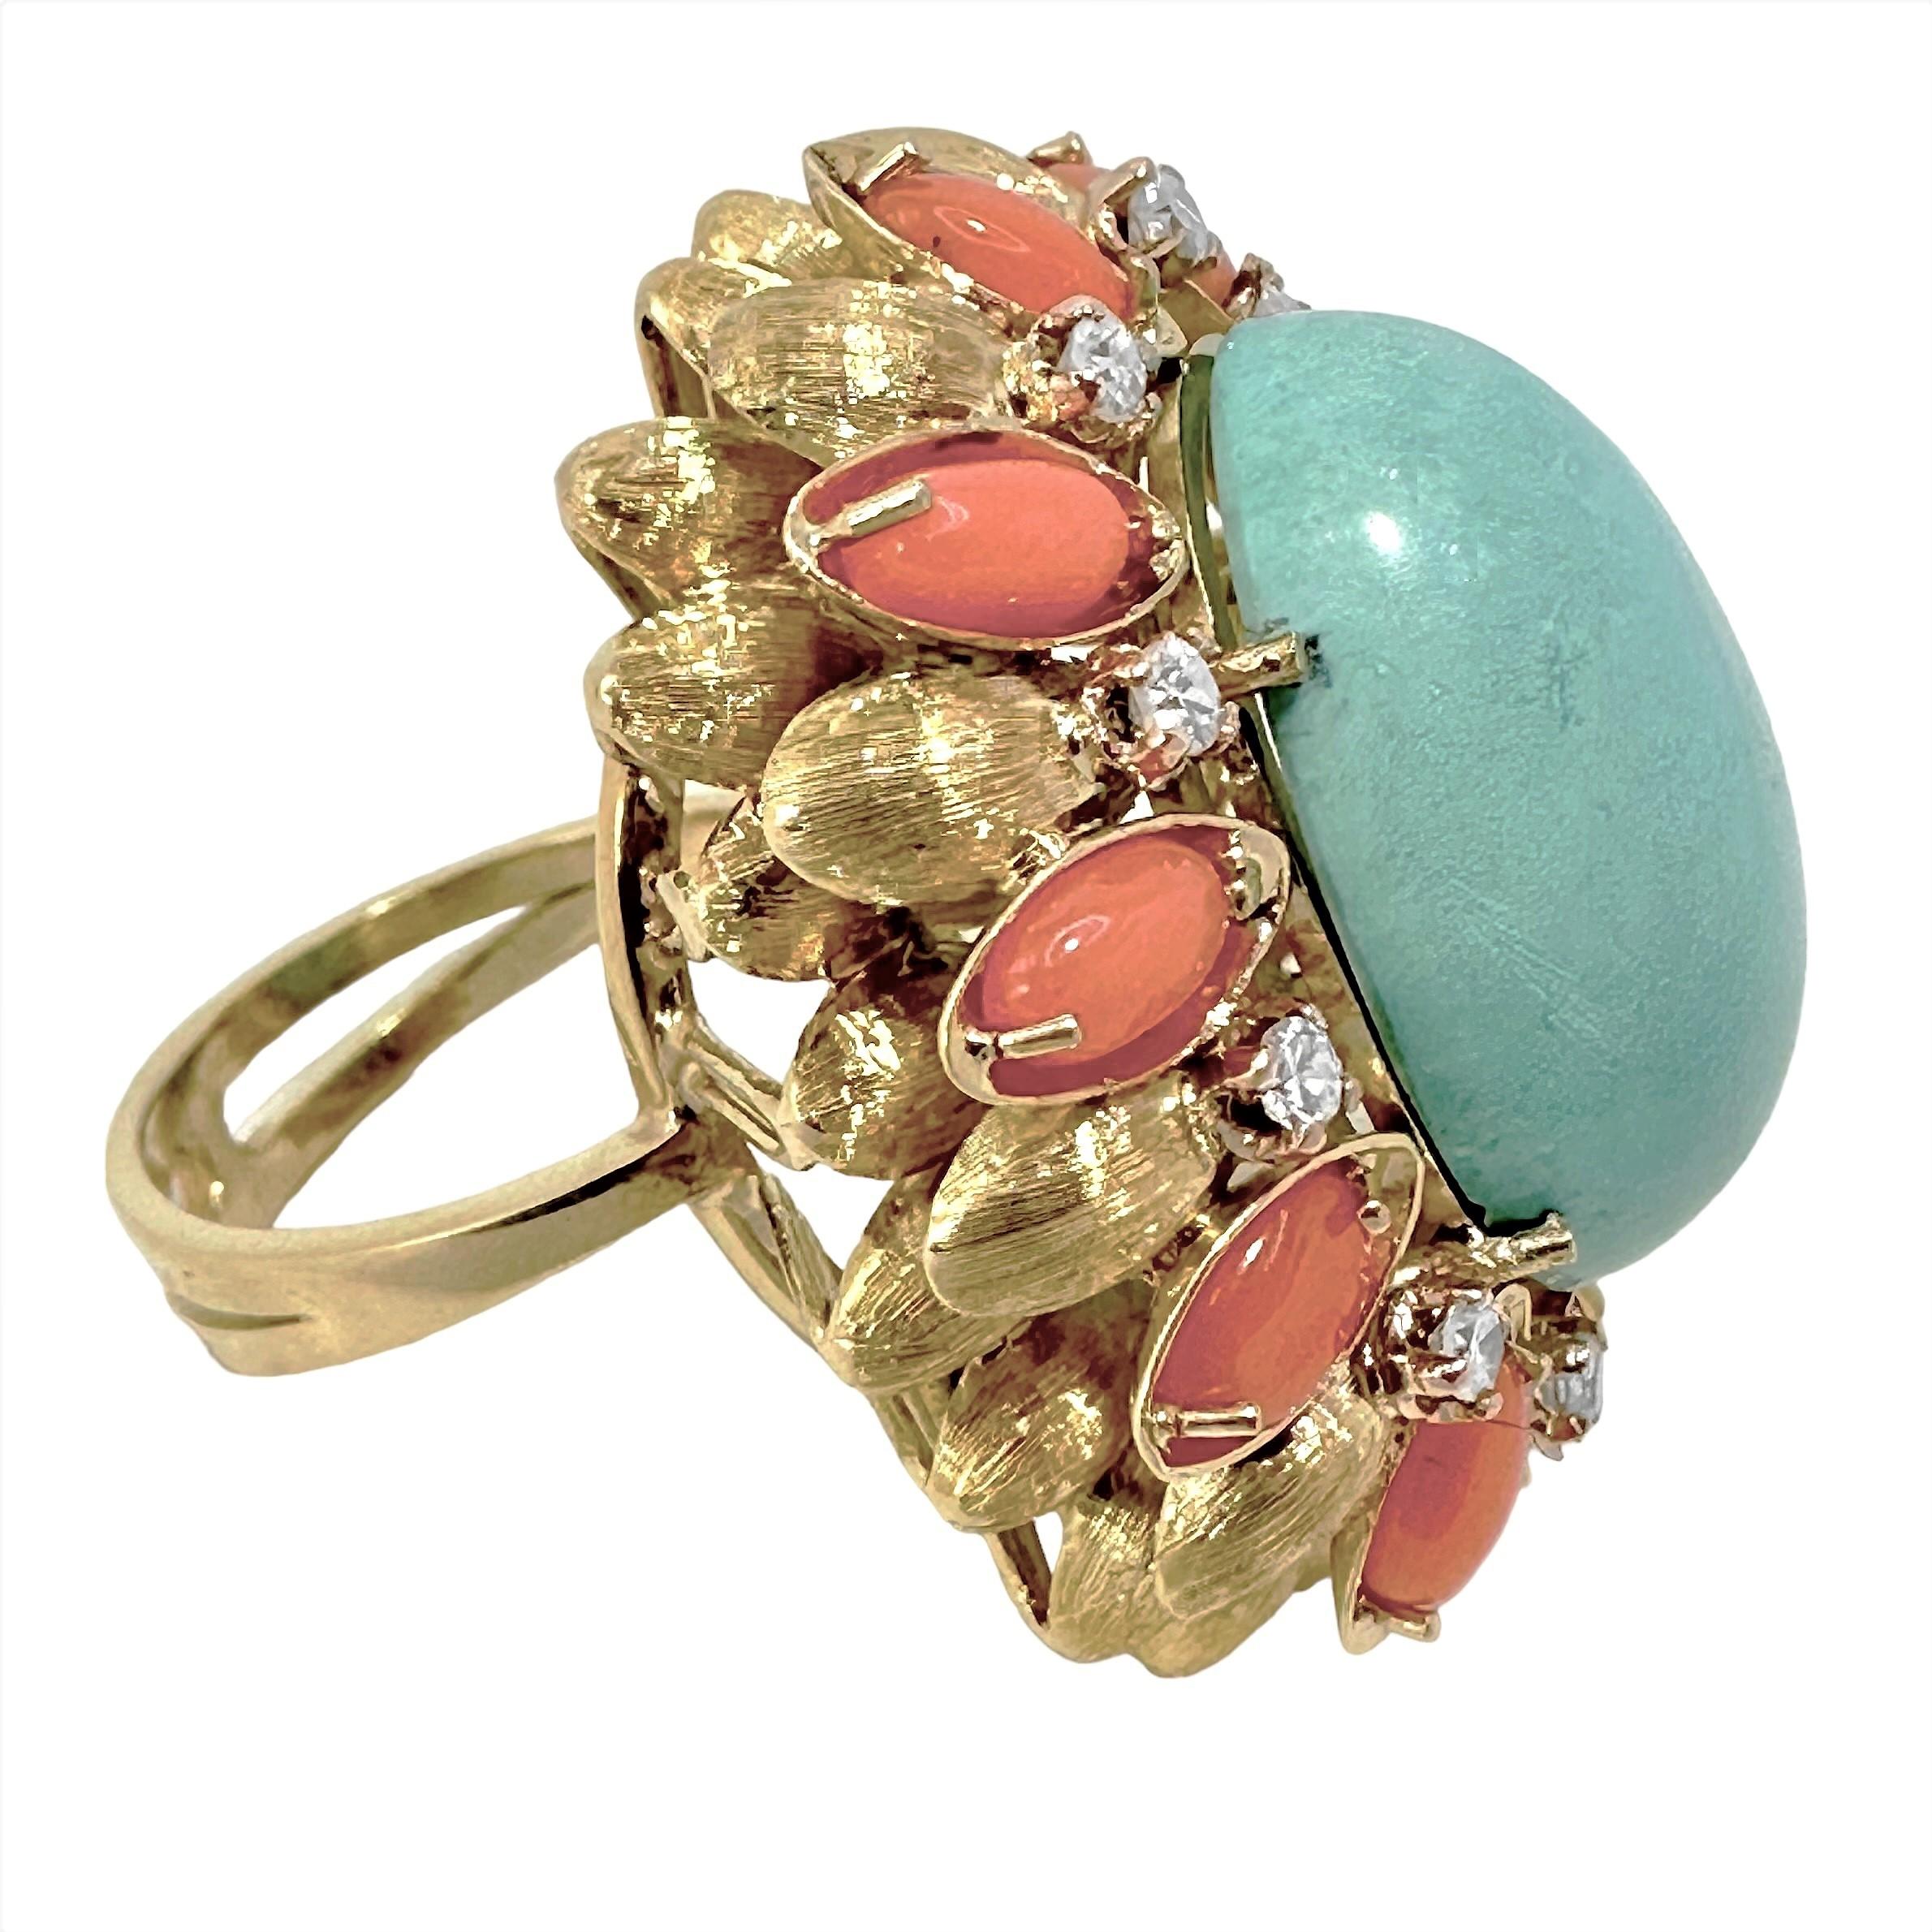 This very large vintage cocktail ring is entirely handmade and finished. Set at the center is a delicate color Persian Turquoise cabochon measuring 3/4 inches by 5/8 inches. This is surrounded by elongated oval shaped Orange Mediterranean Coral